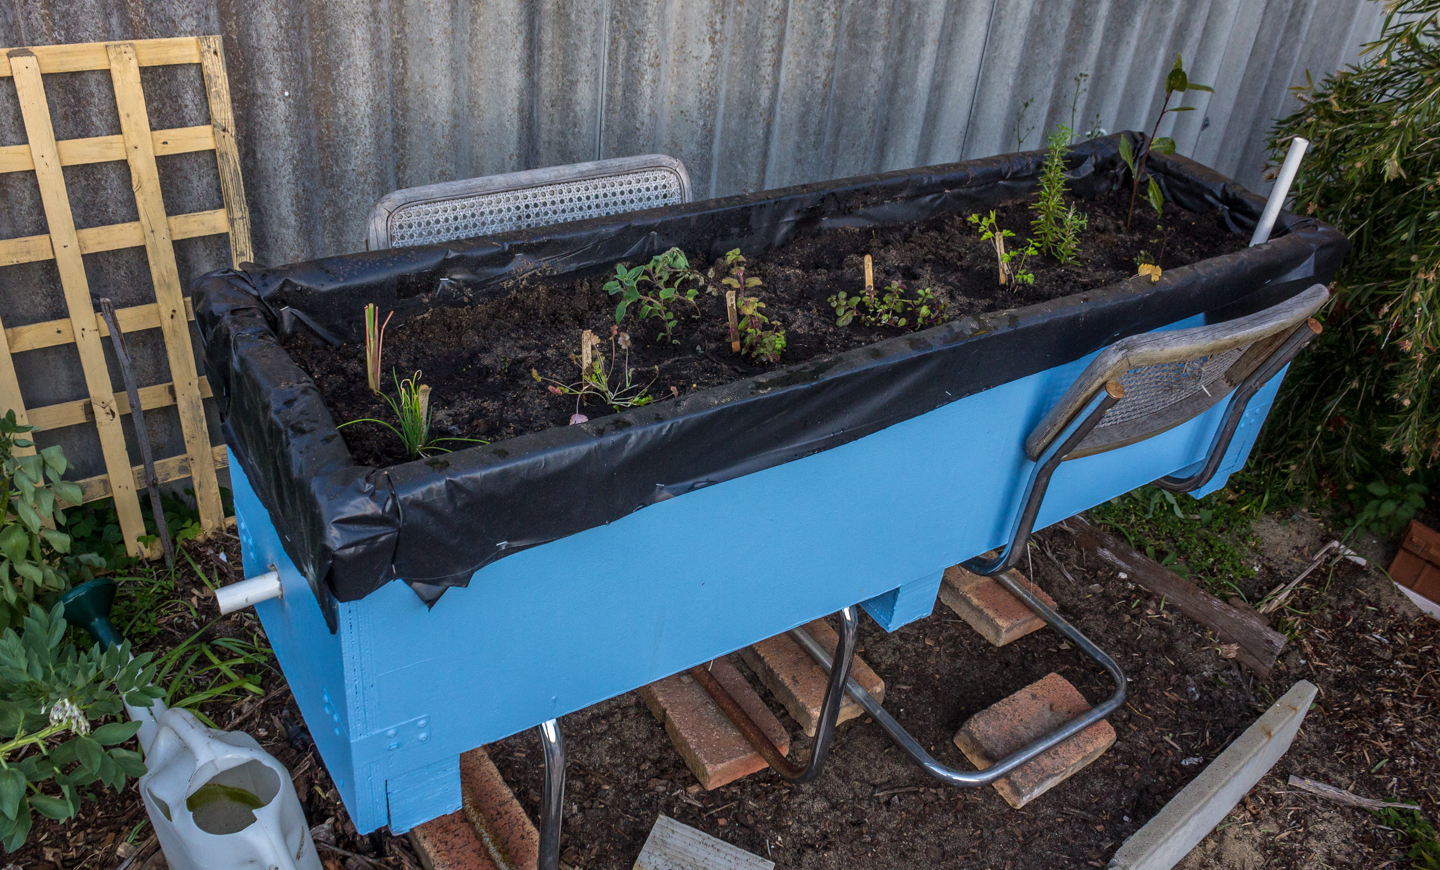 19/09/15 Day 28 [Day 2 of the project]: The Final Wicking Bed 3 Herb 14